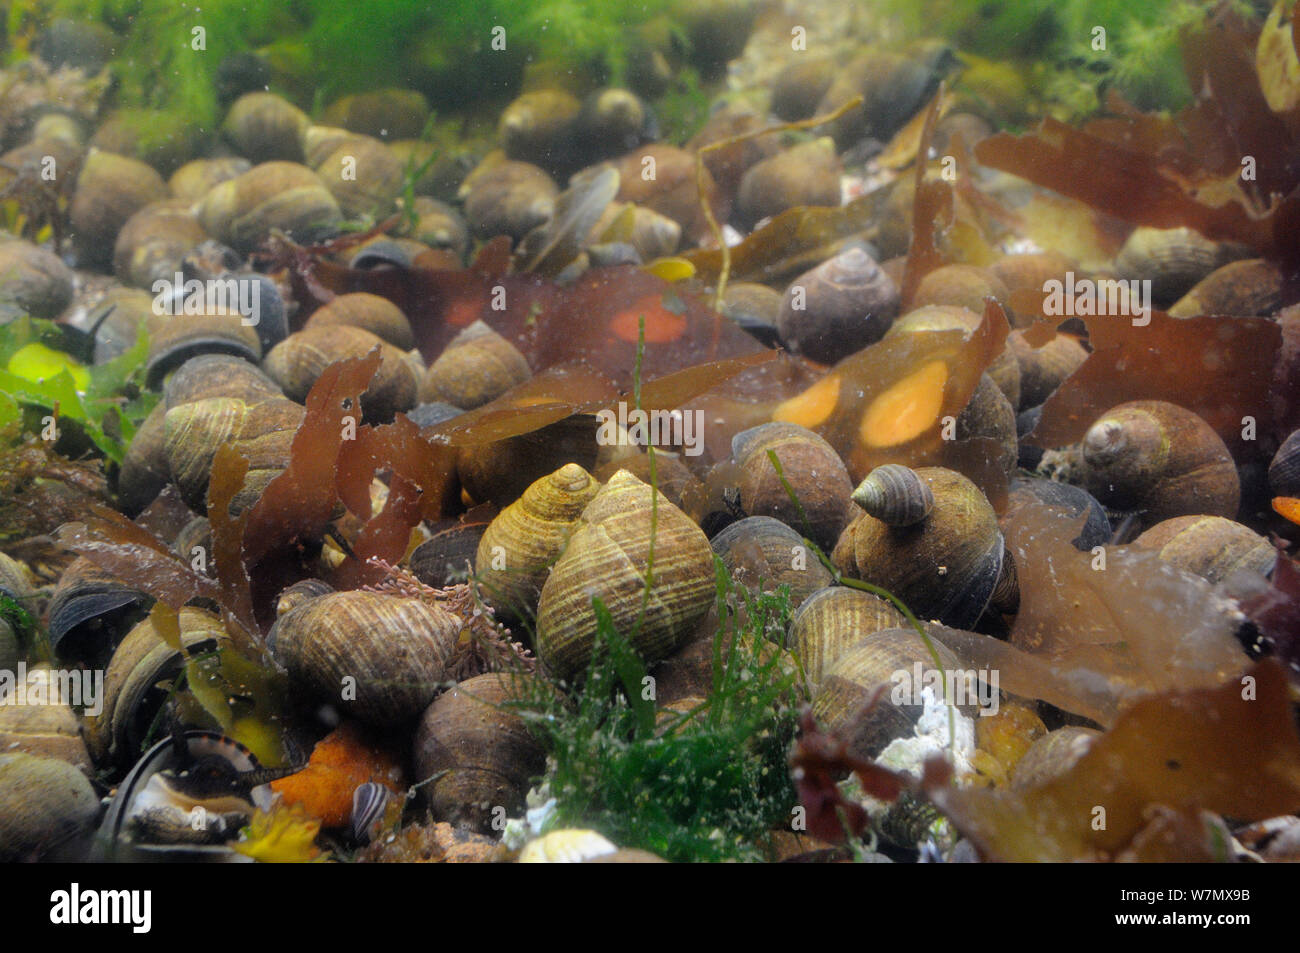 Dense aggregation of adult and young Common periwinkles (Littorina littorea) in a rockpool, North Berwick, East Lothian, UK, July. Stock Photo